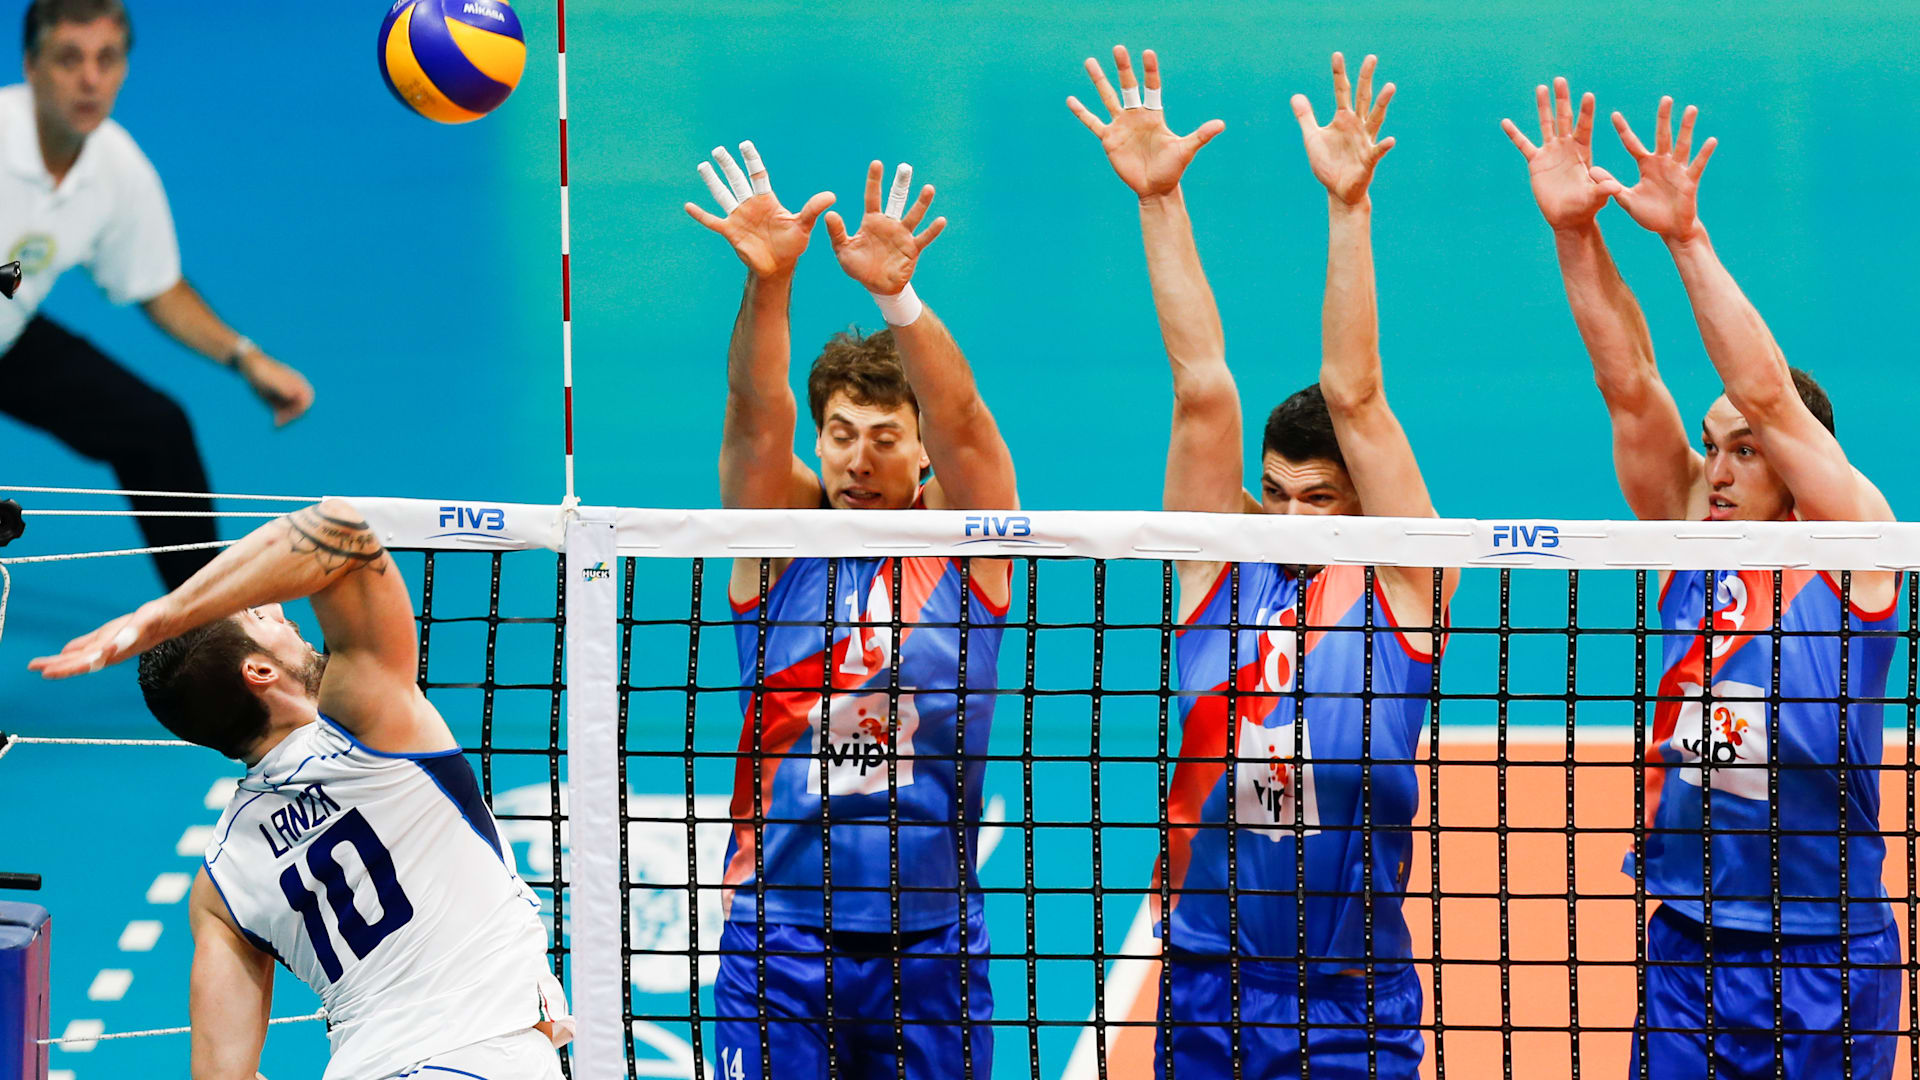 Volleyball rules Know all regulations, the court size and players needed